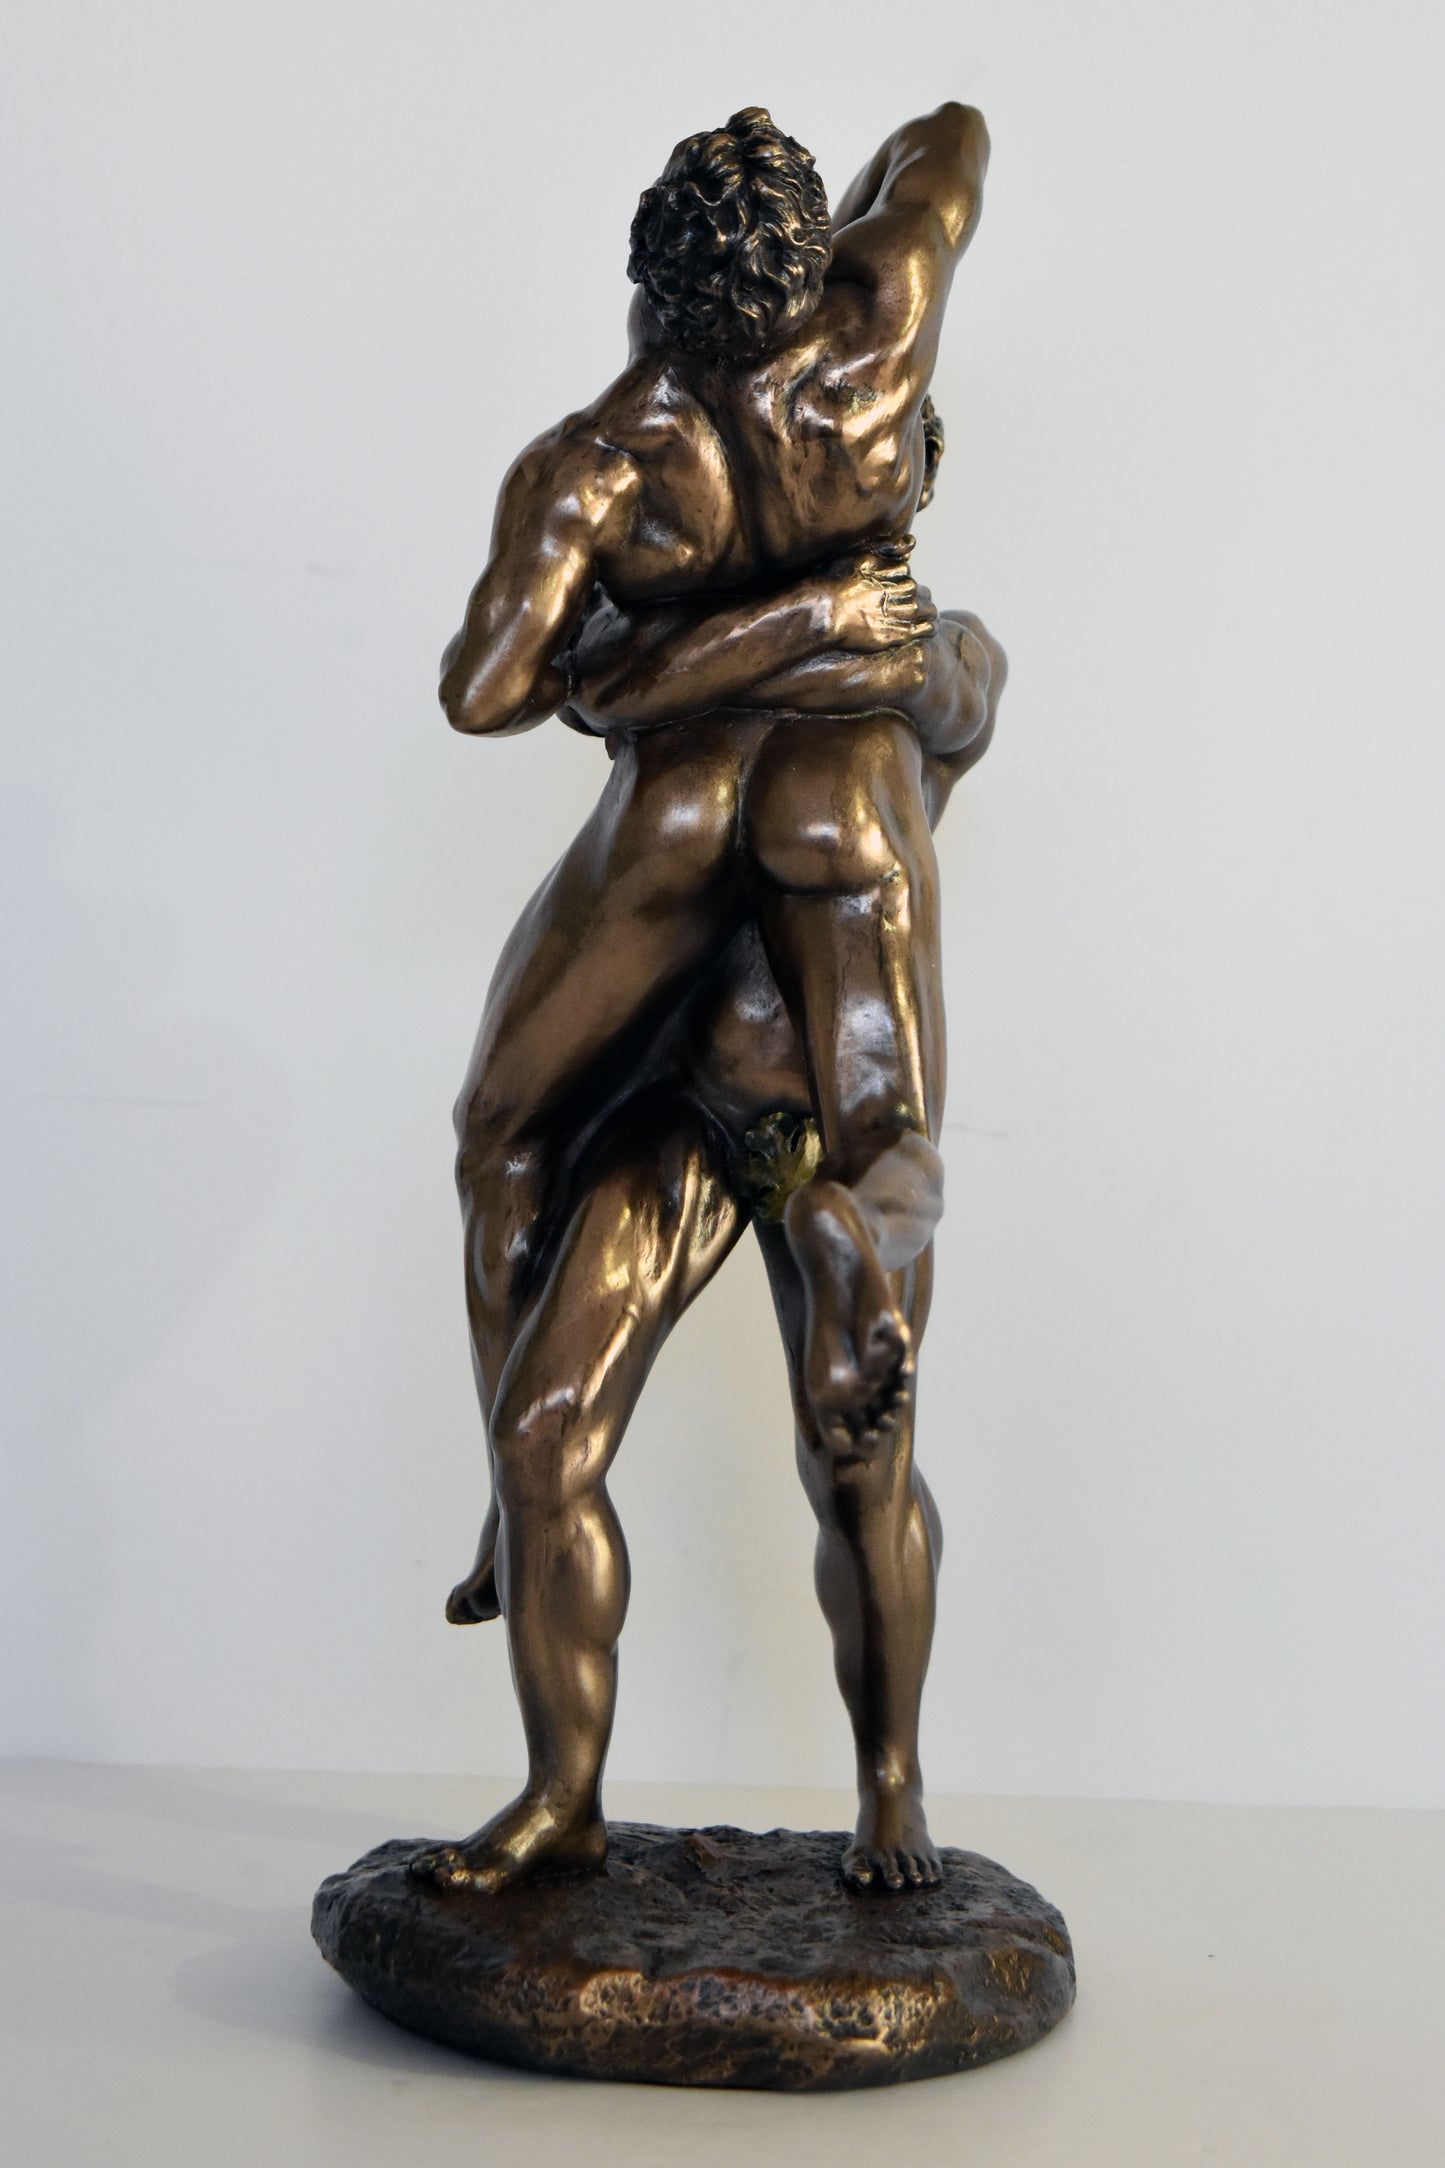 Hercules Heracles - Greek Divine Hero - Antaeus of Libya - Wrestling Match - Part of the Labours - Cold Cast Bronze Resin